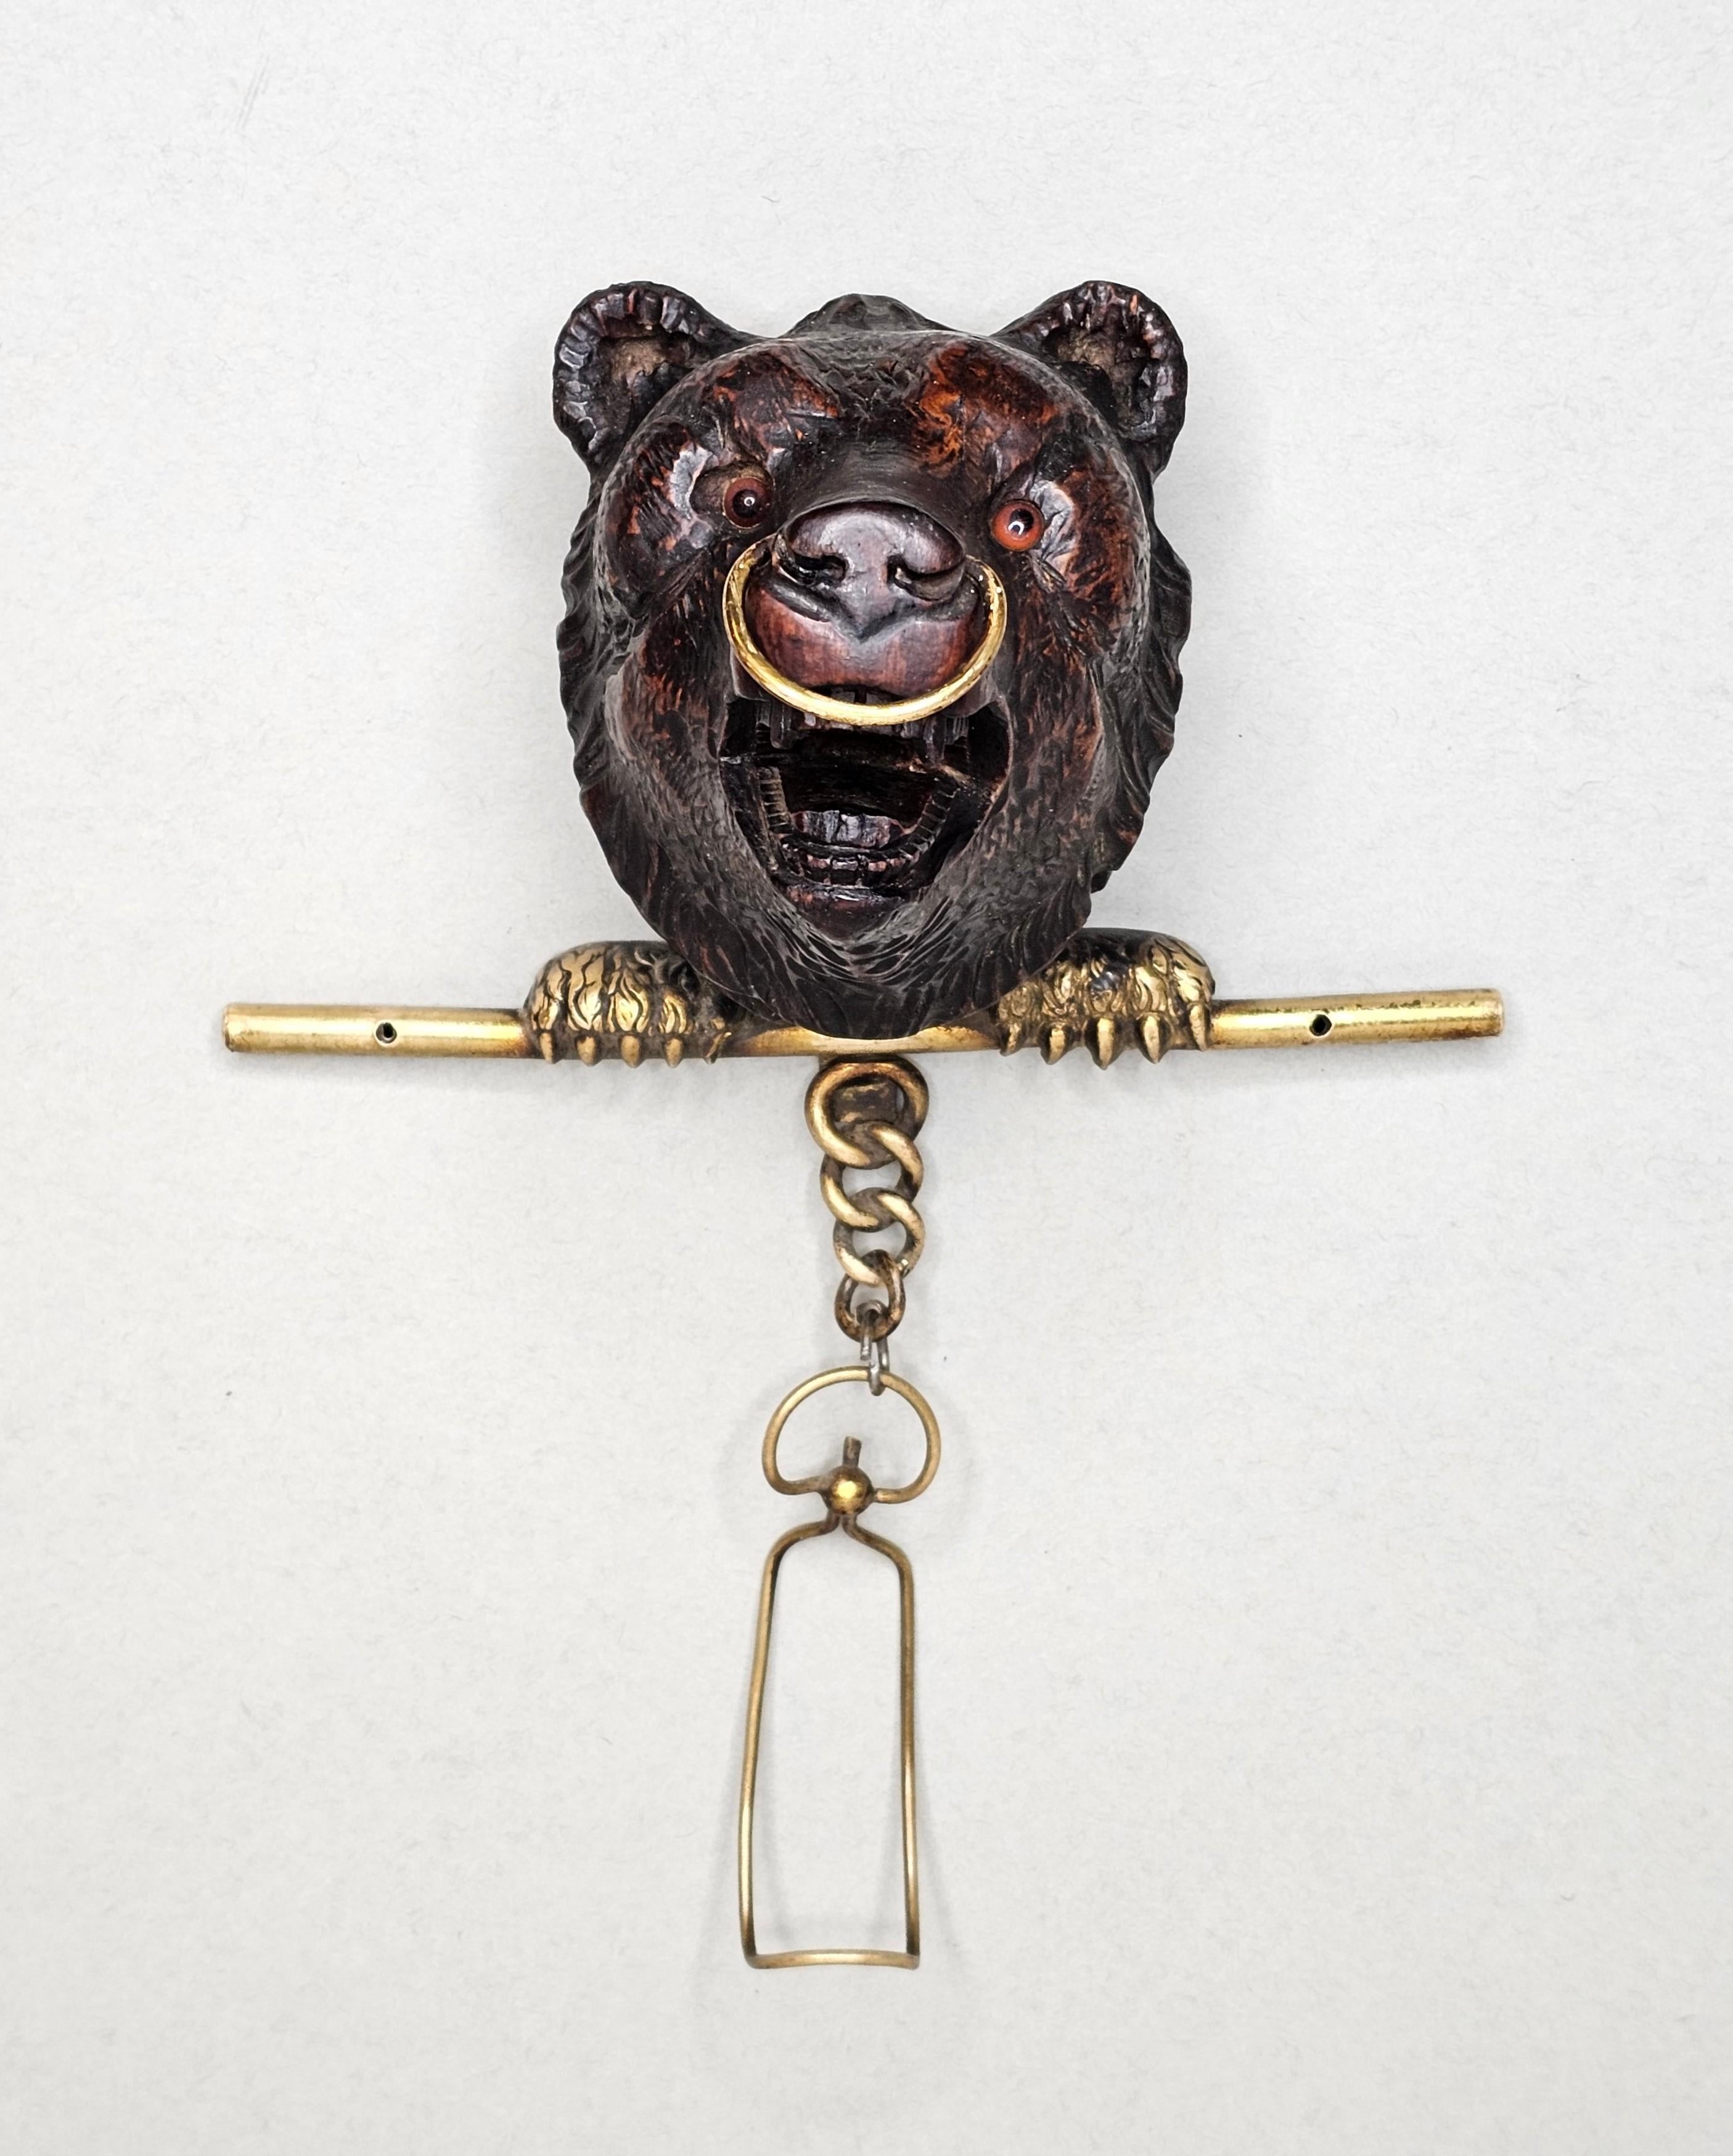 A rare and exceptional hand carved German Black Forest wall-mounted hanger. circa 1890

Born in the late 19th / early 20th century, featuring an intricately carved walnut figural bear's head with inset glass eyes, finely detailed gilt brass paws